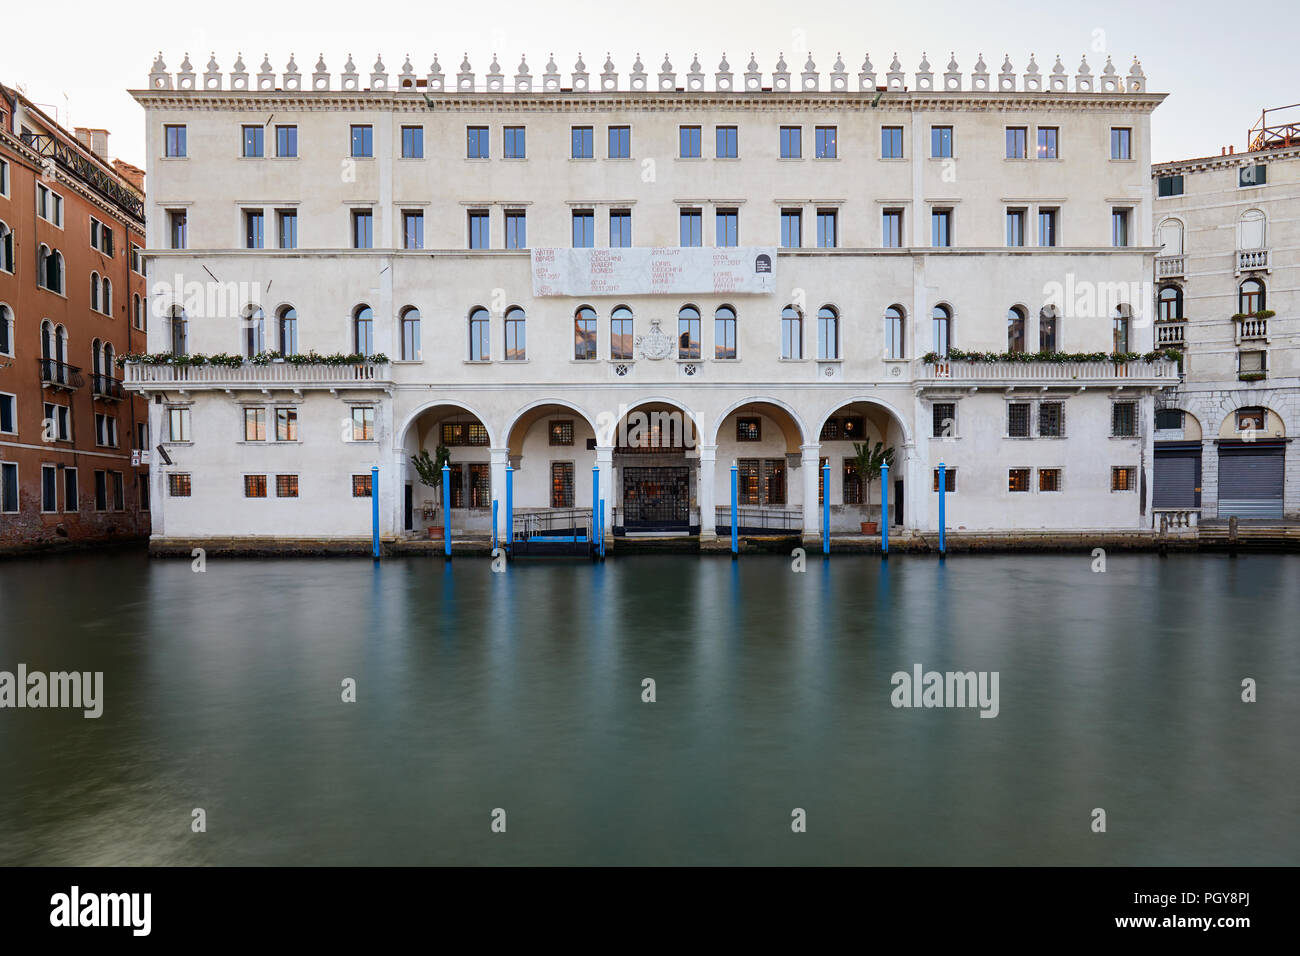 VENICE, ITALY - AUGUST 15, 2017: Fondaco dei Tedeschi, luxury department store building with grand canal in the early morning Stock Photo